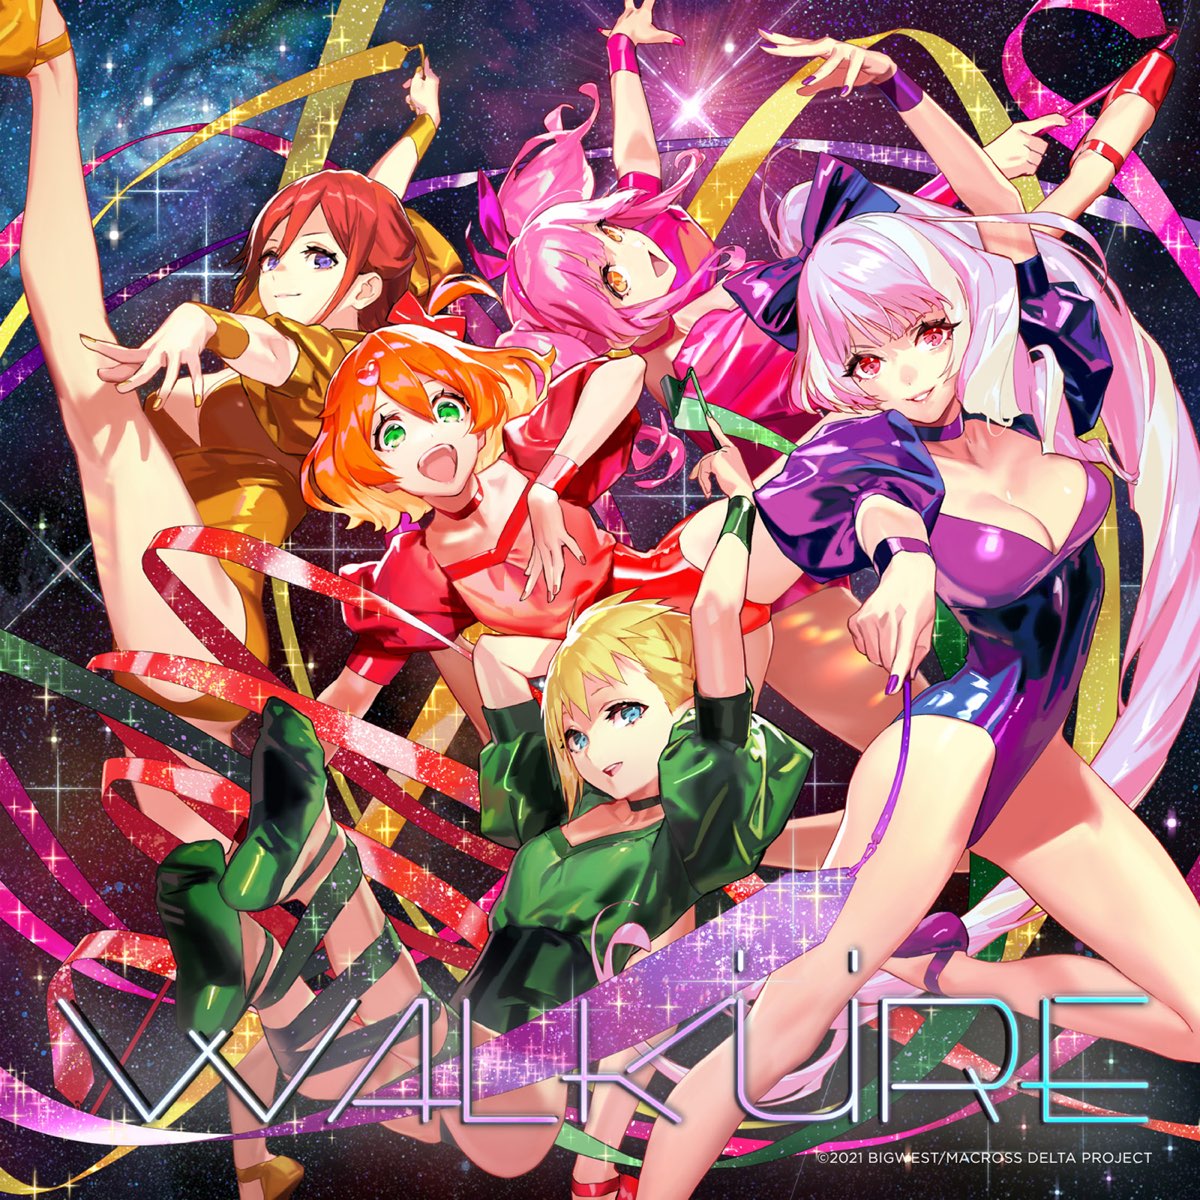 Macross delta The Movie "ZETTAI LIVE!!!!!!" Vocal Song Collection Walkure  Reborn! by Walkure on Apple Music